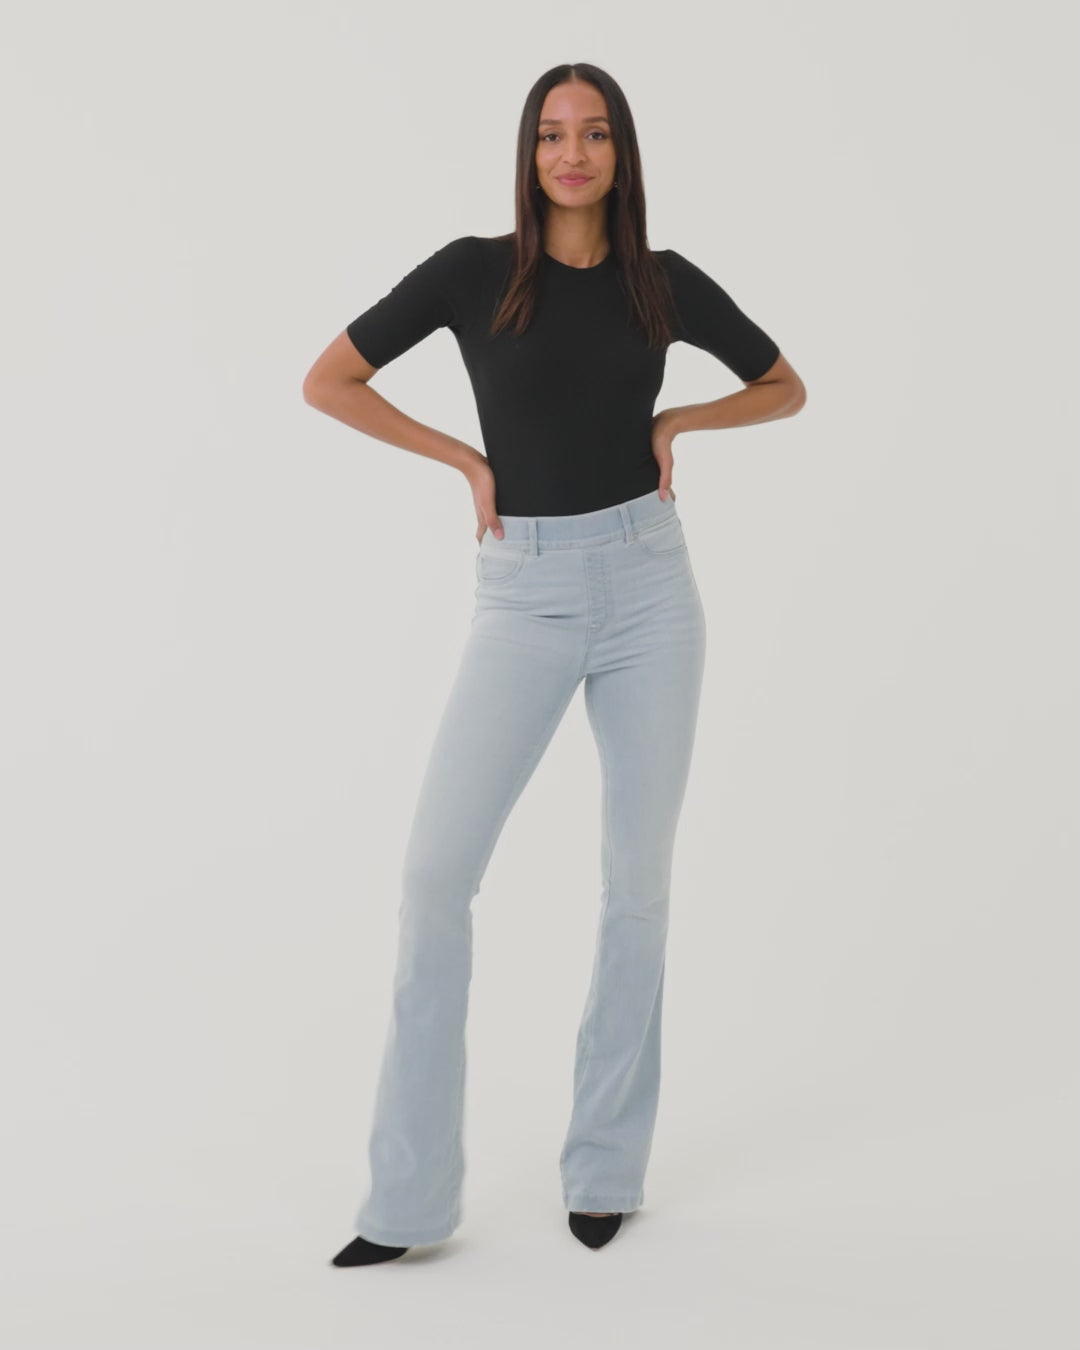 Spanx - Black Wash Cropped Flare Jeans - Select Size